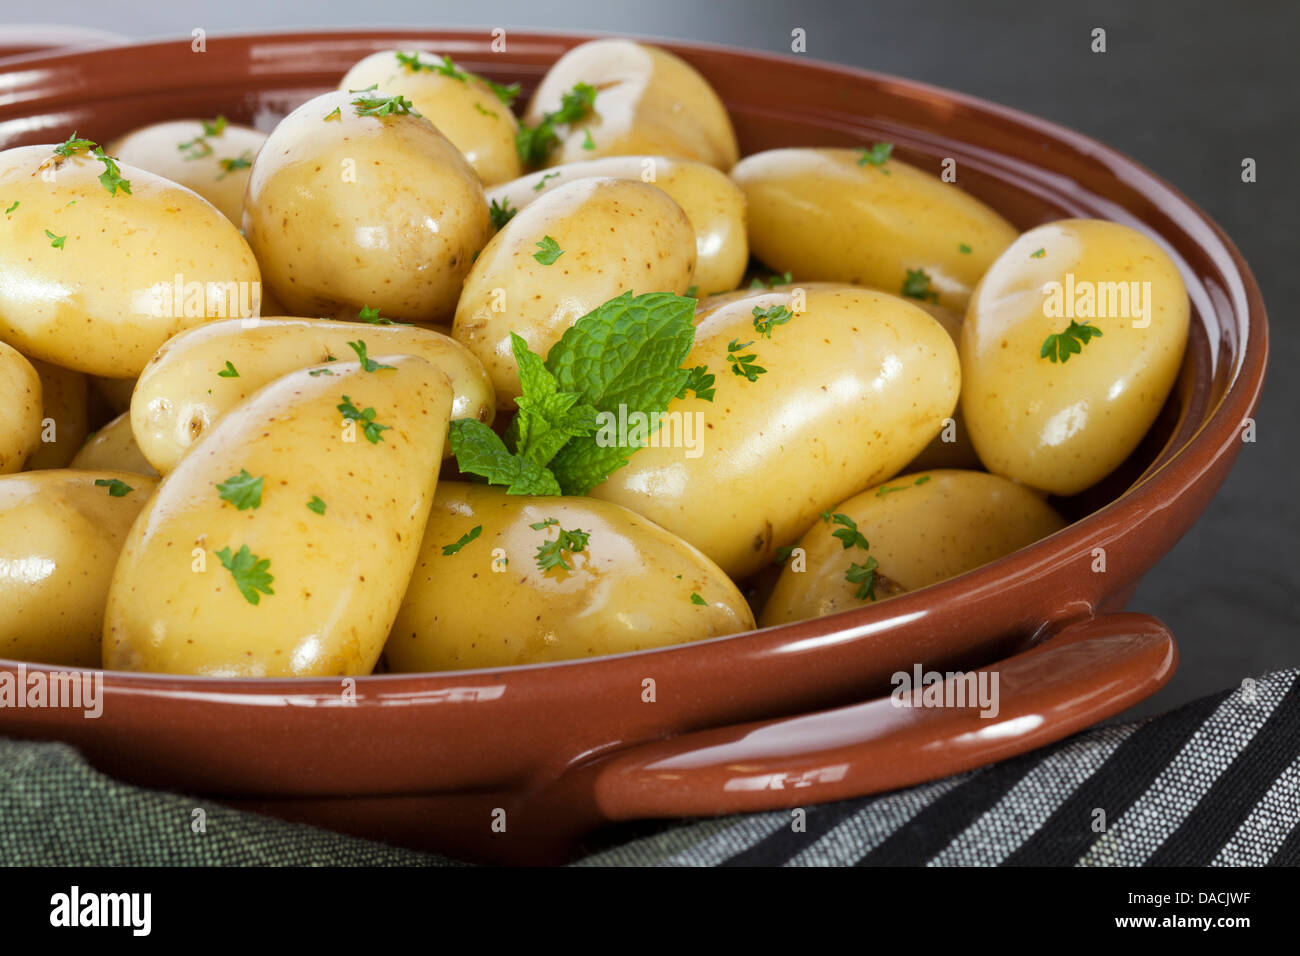 New Potatoes Steamed new potatoes in their skins with extra virgin olive oil, parsley and mint. Stock Photo